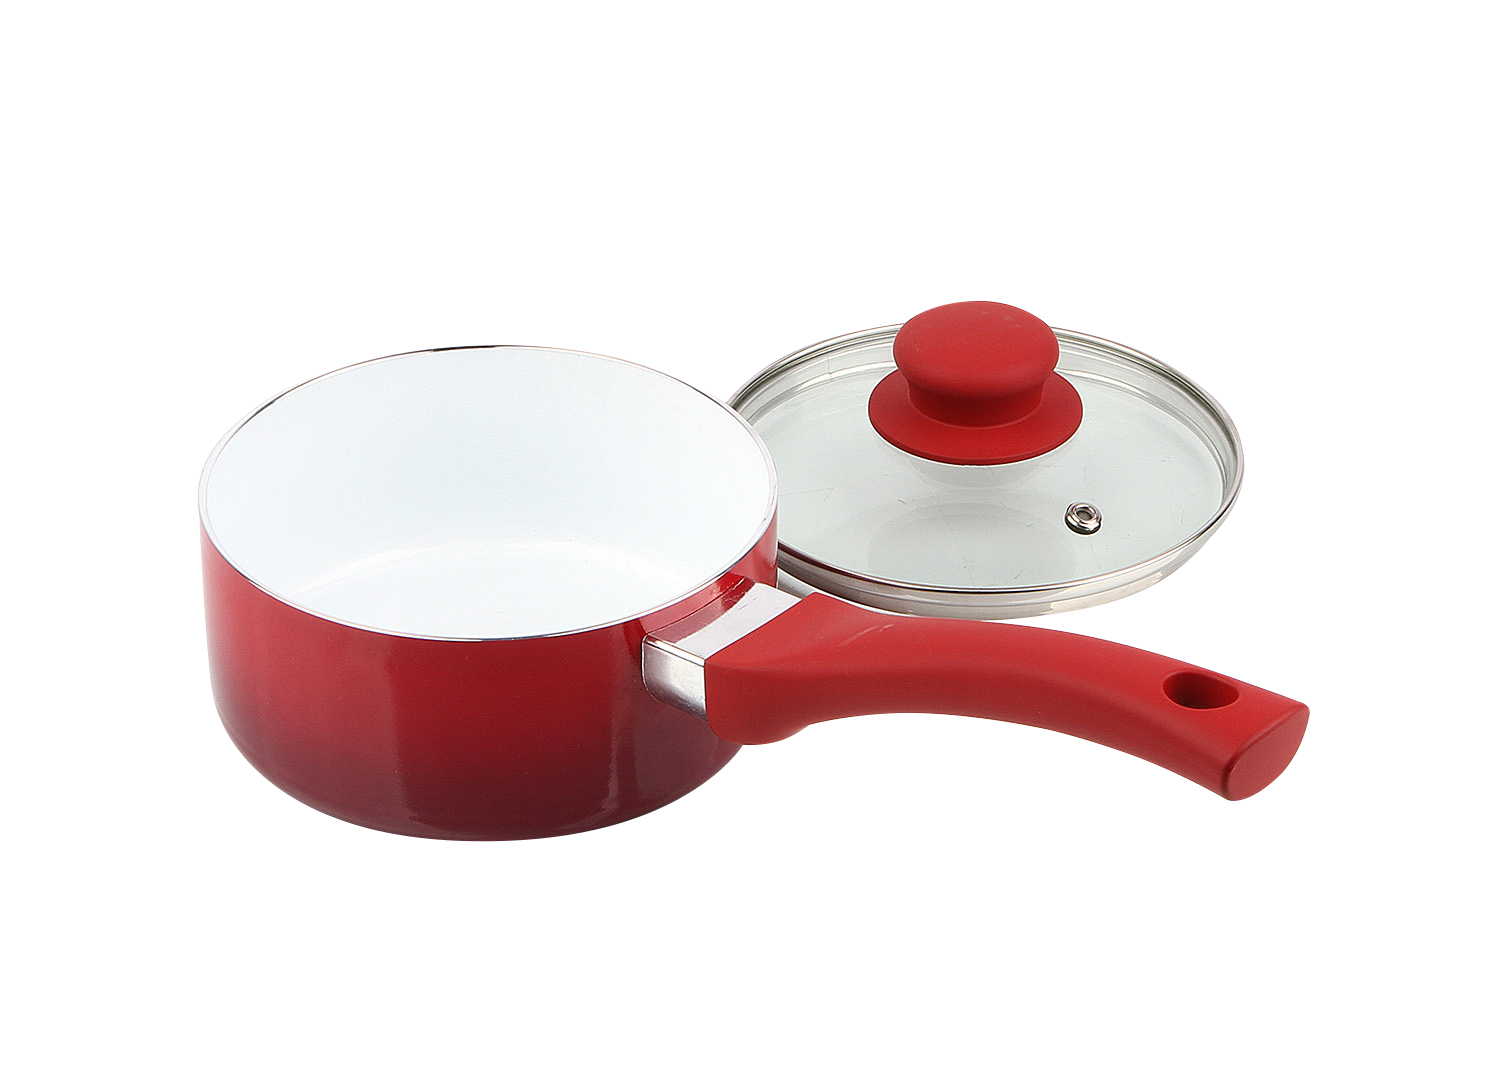 Mainstays Ceramic Nonstick 12 Piece Cookware Set, Red Ombre - image 6 of 8